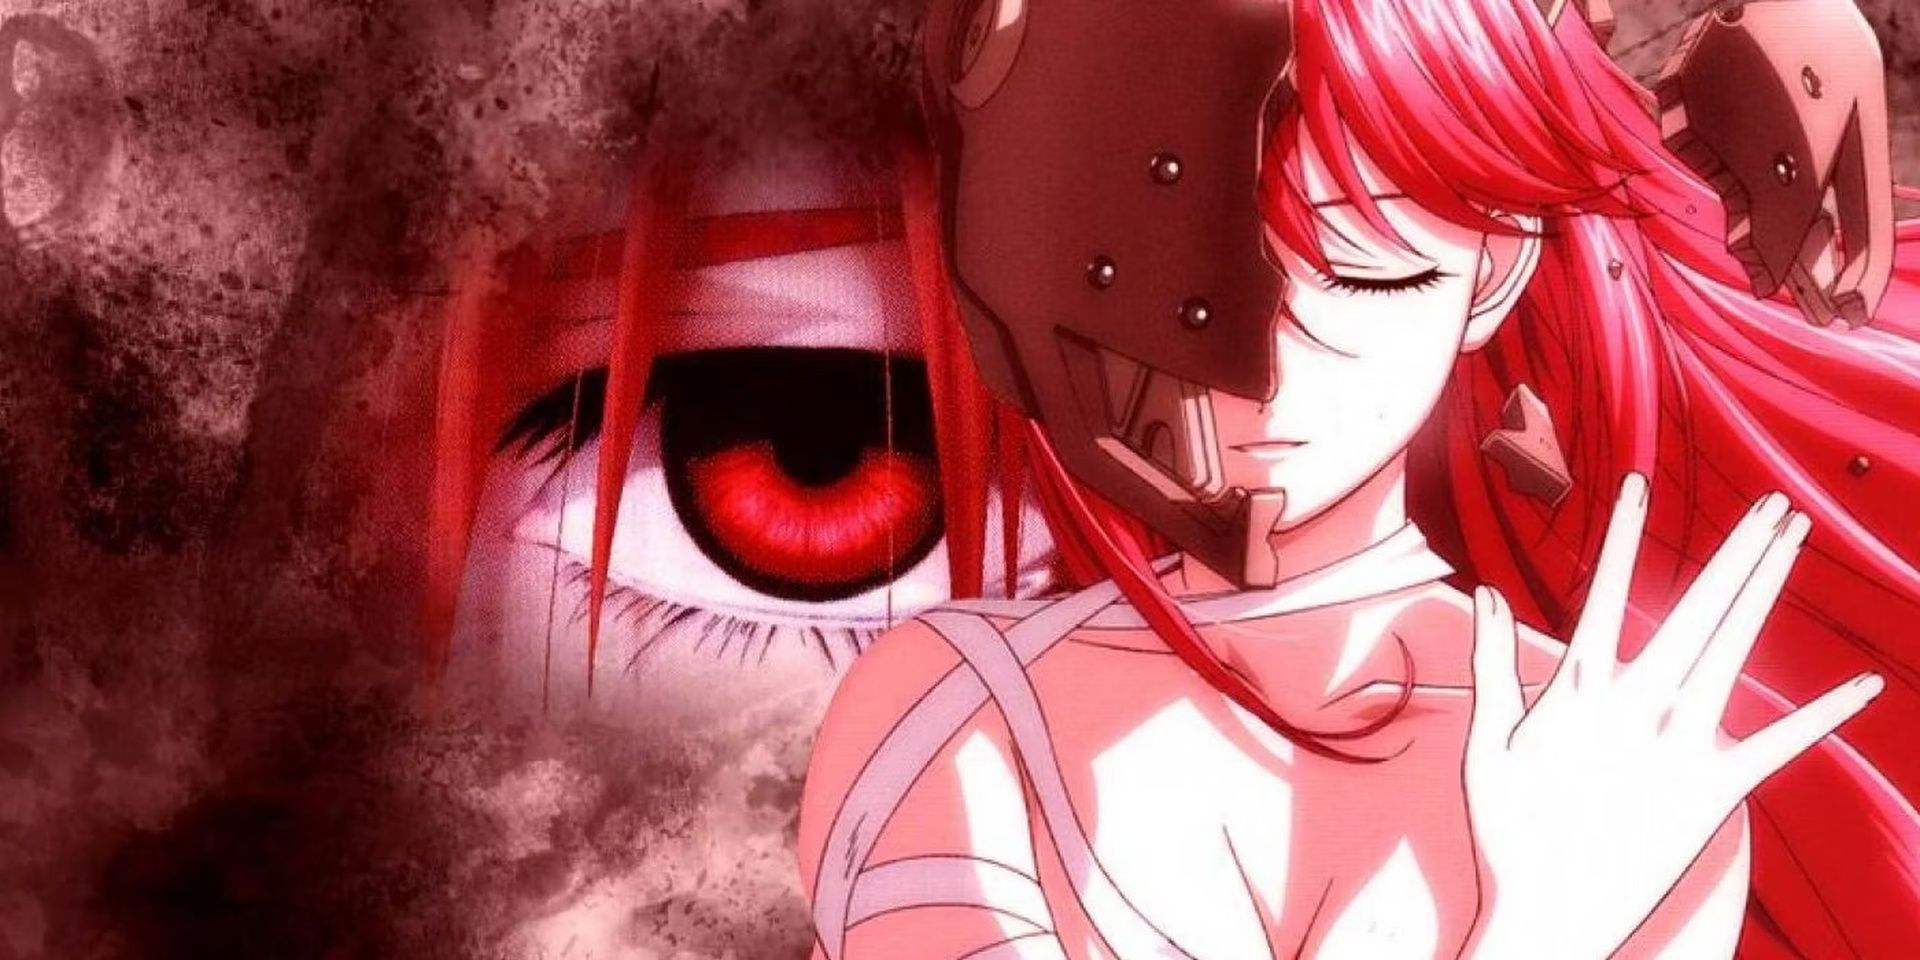 An image of Lucy from Elfen Lied being freed from her restraints before enacting her plan to eliminate mankind.